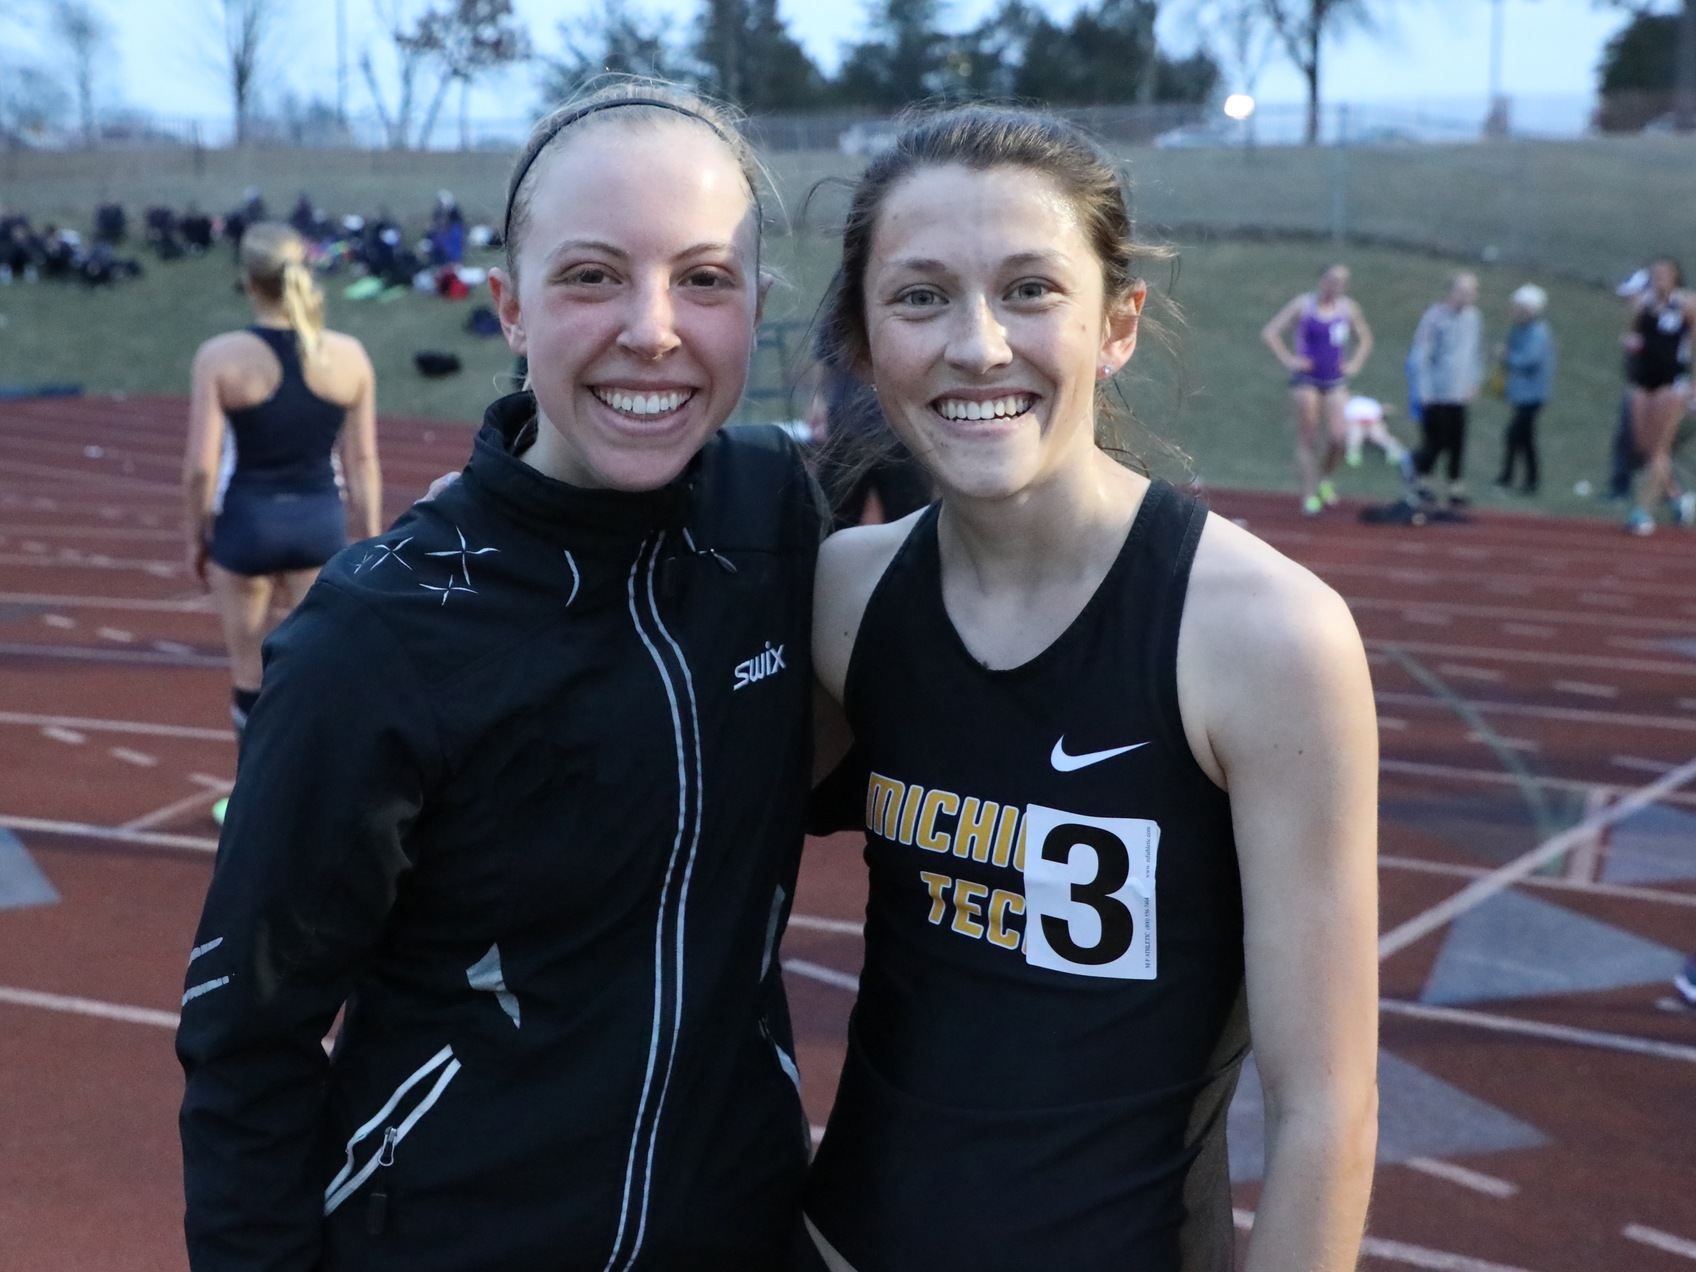 Byrd and Vigil Eclipse School Record in 5000m at UW-Platteville